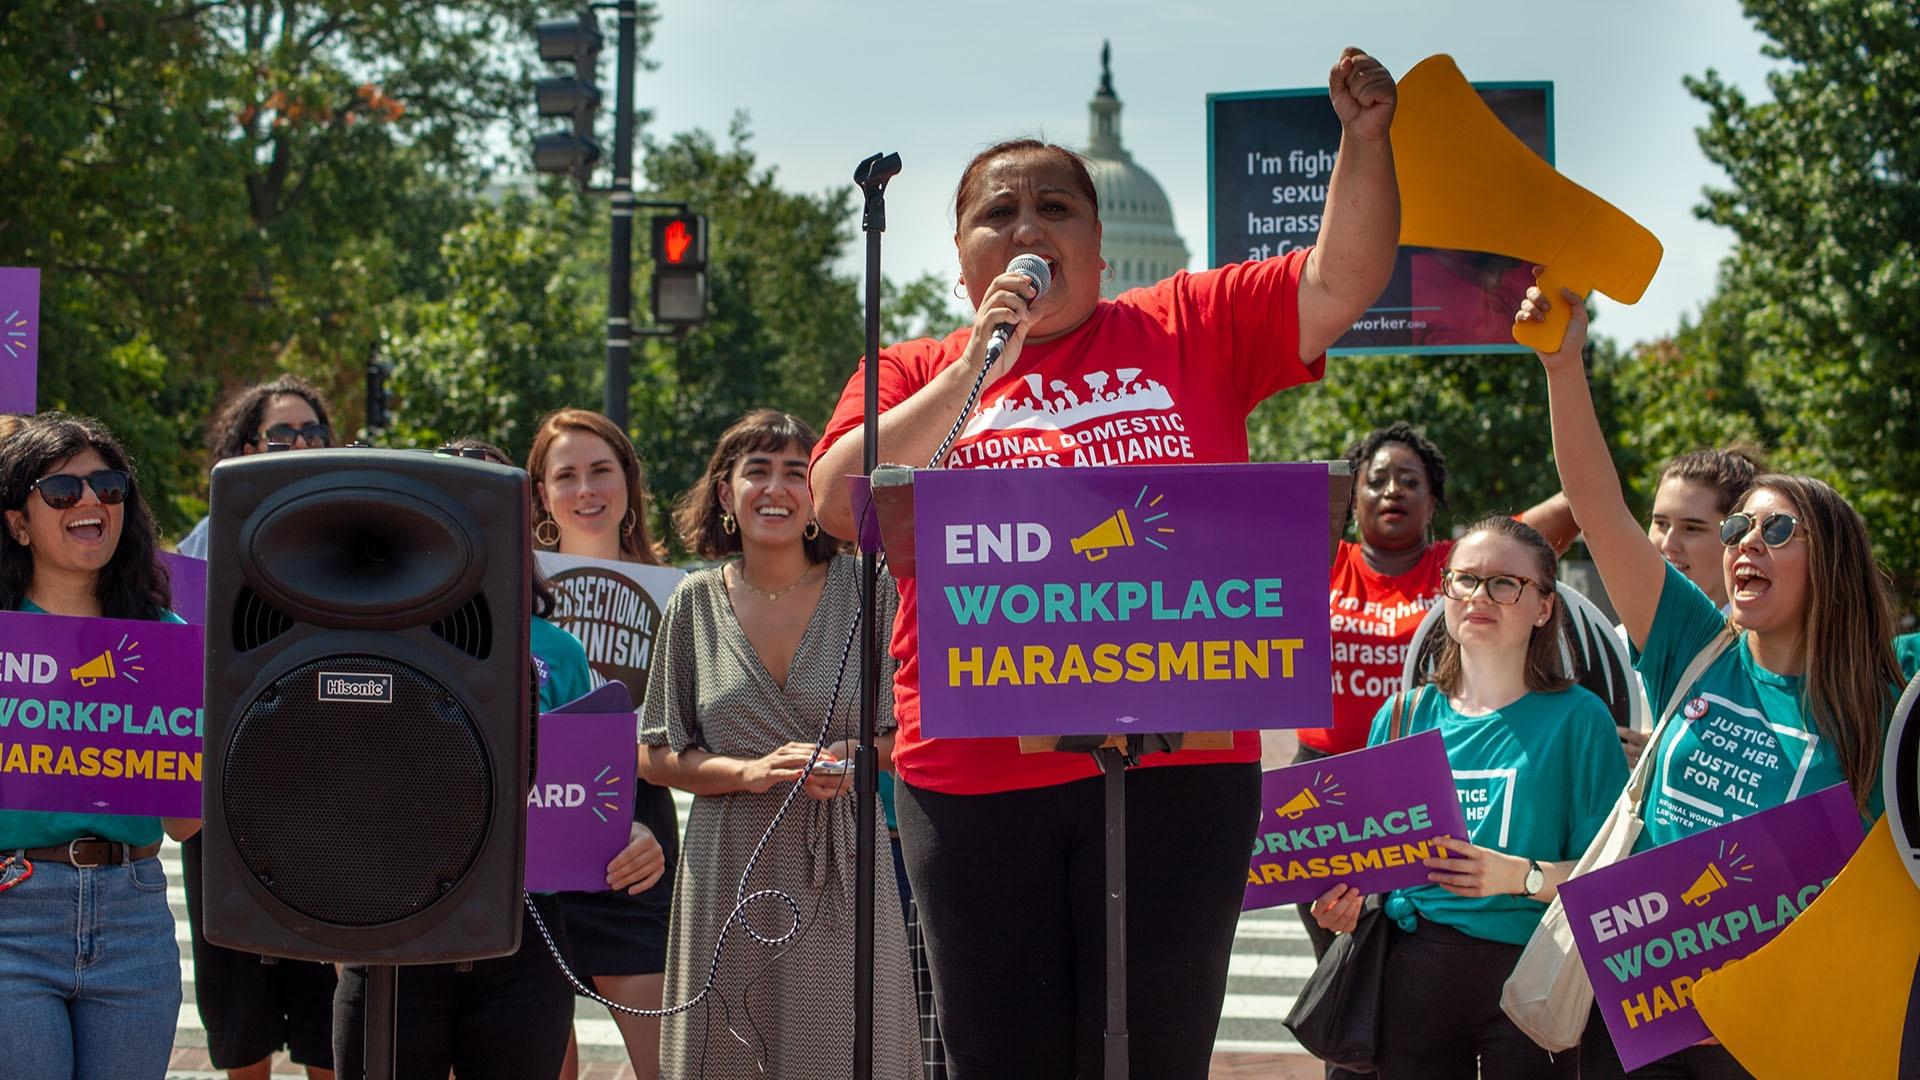 Image of Ingrid Vaca, an organizer with the National Domestic Workers Alliance.